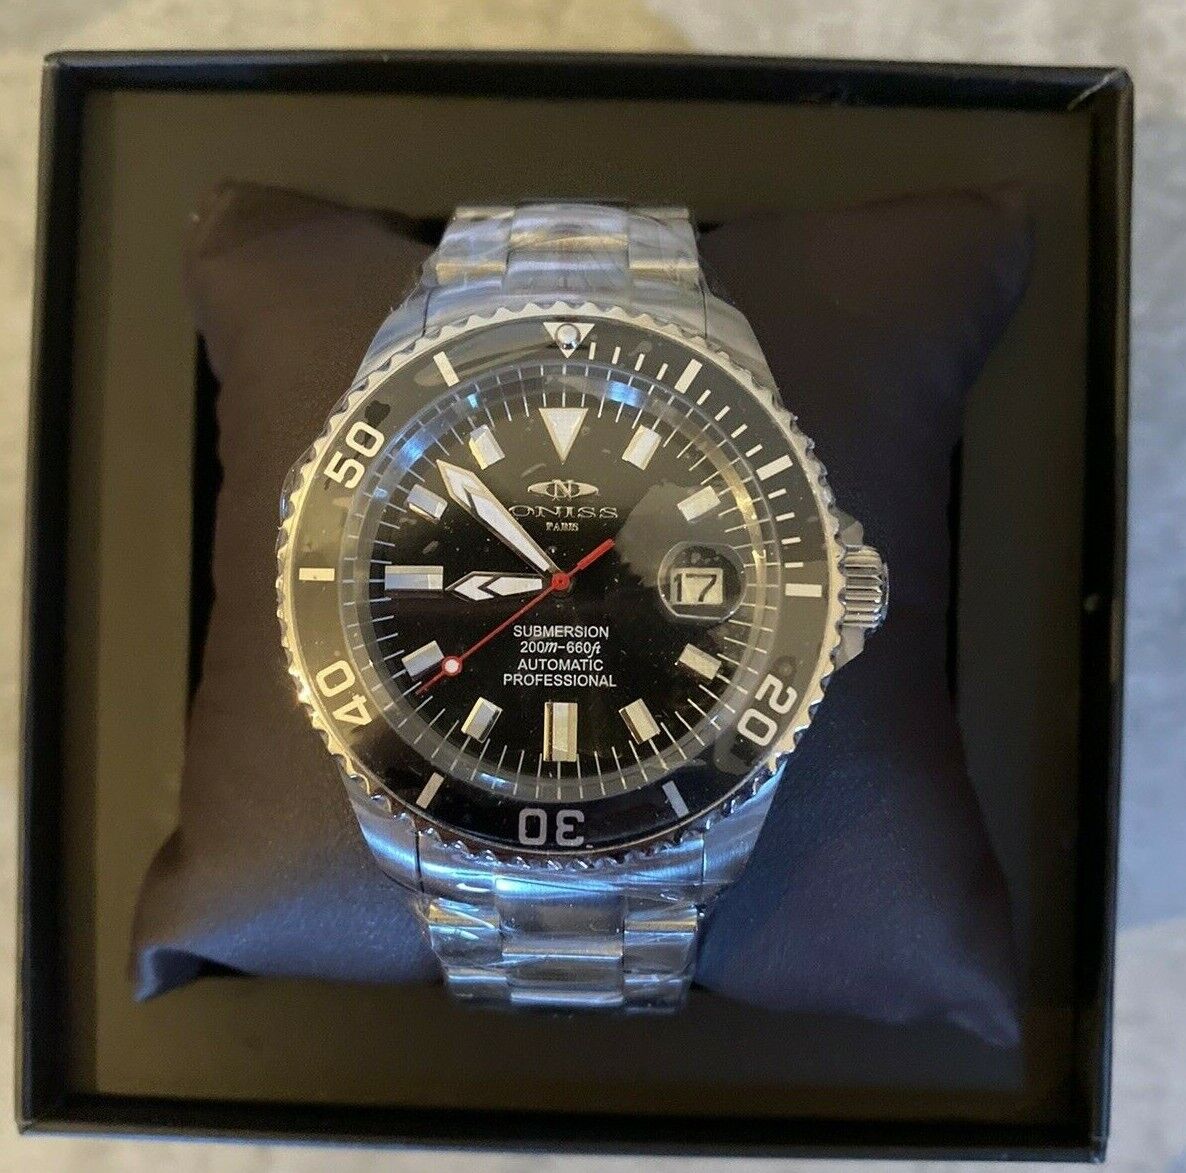 Brand New Oniss Submersion AUTOMATIC PROFESSIONAL, ON5588-11(BKBK), MSRP $695.00